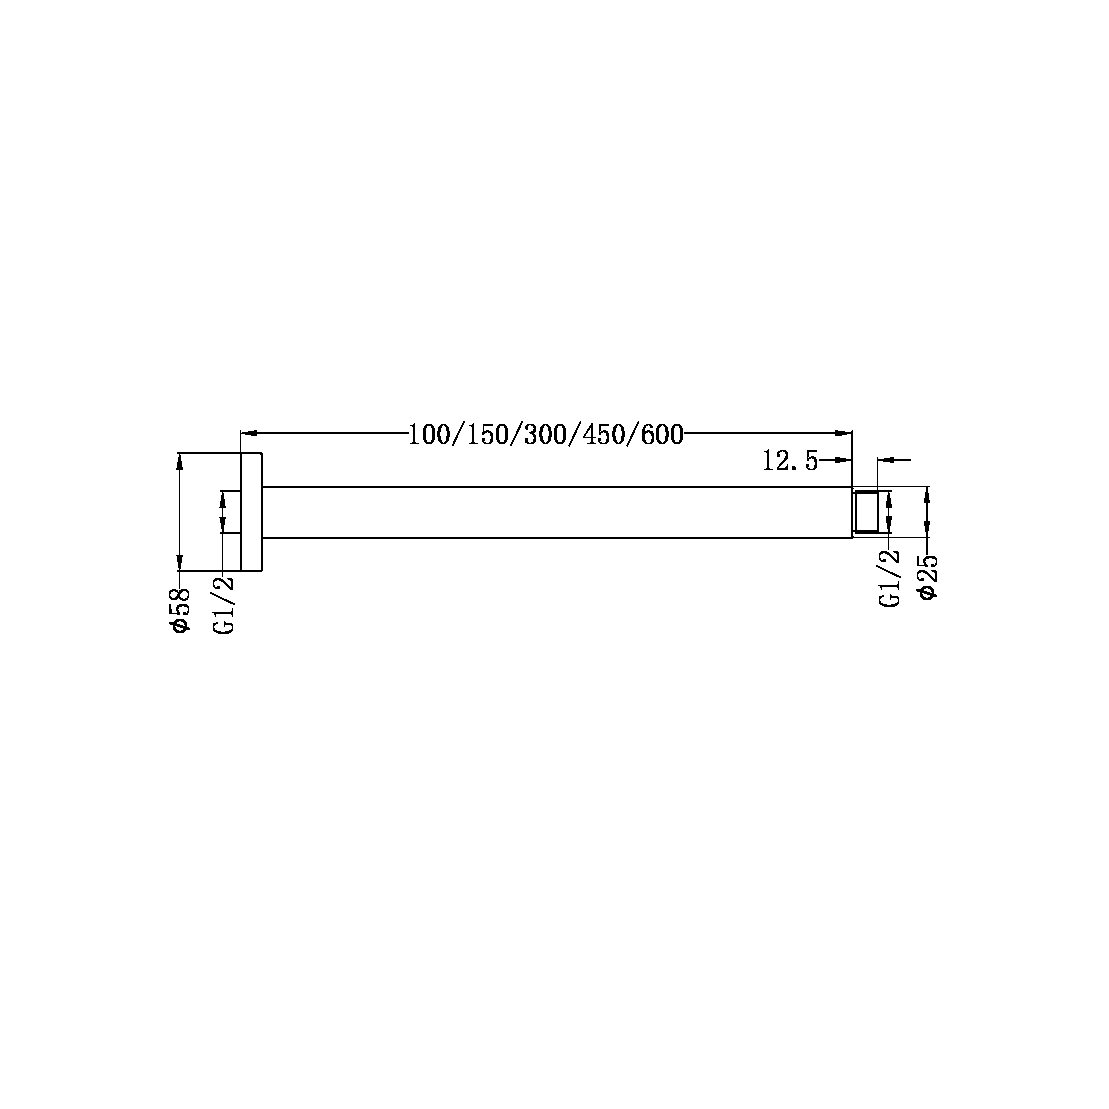 Round Ceiling Arm 600MM Length